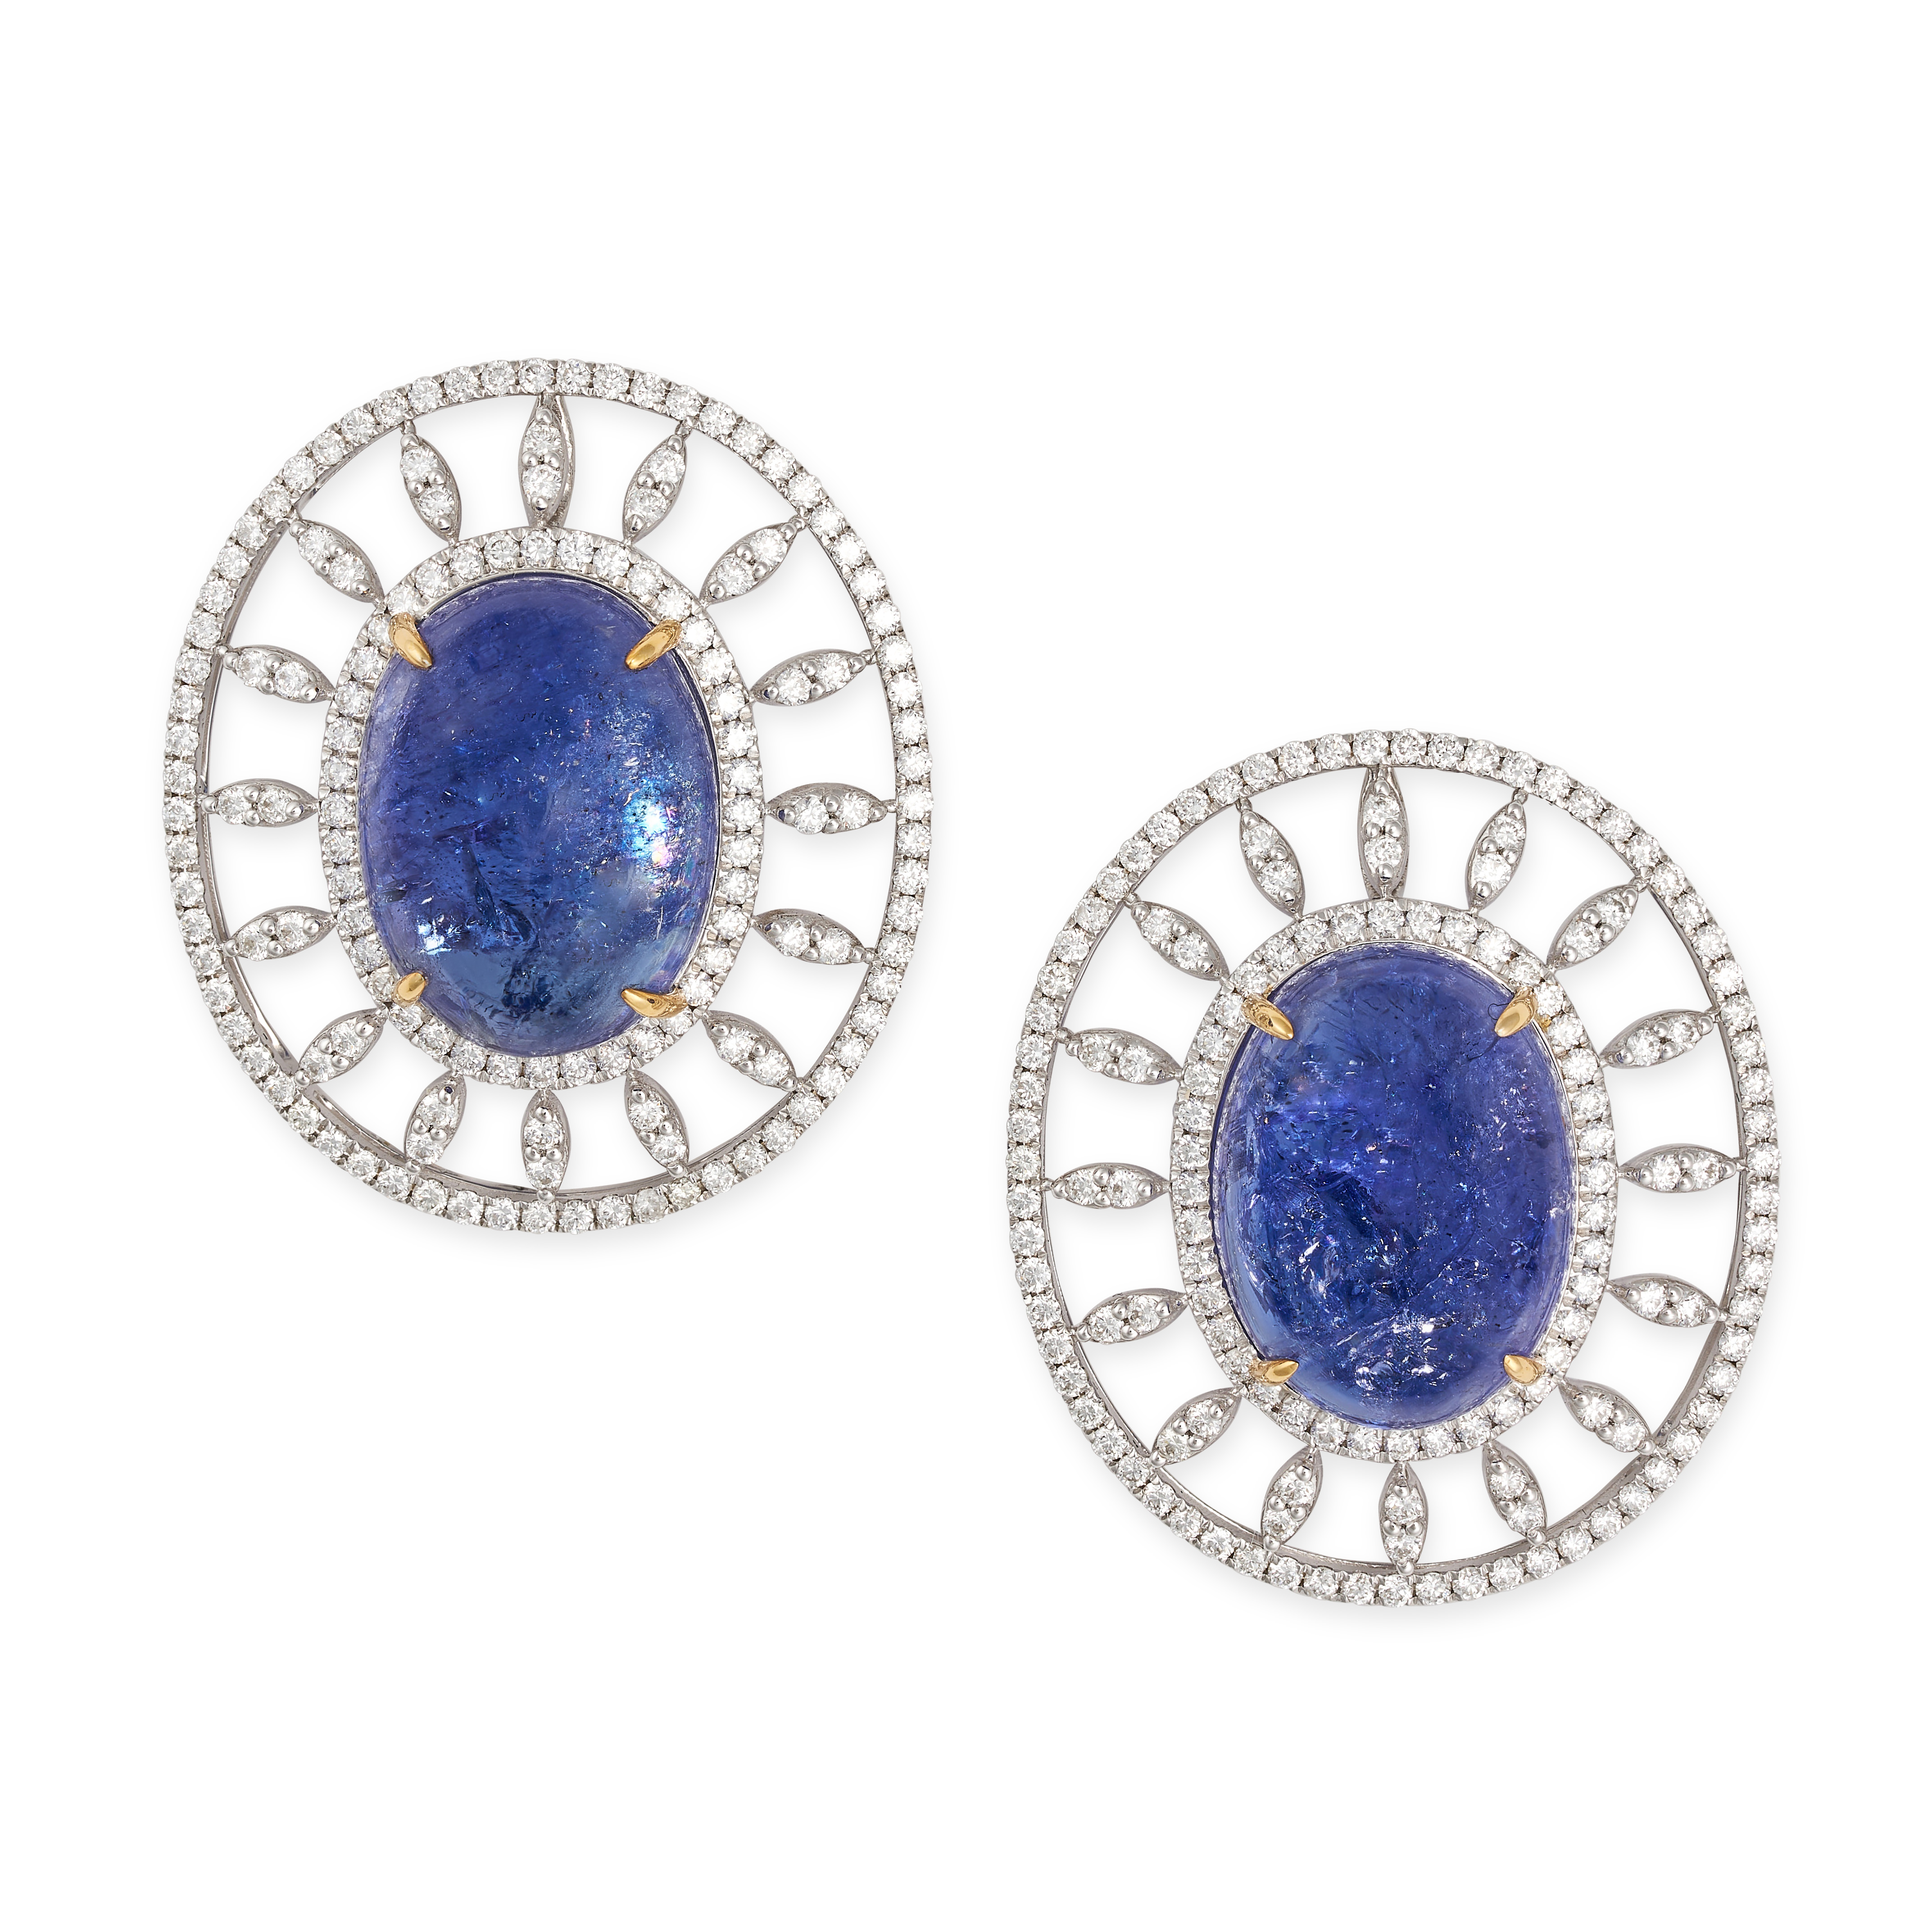 A PAIR OF TANZANITE AND DIAMOND EARRINGS in 18ct white gold, each set with an oval cabochon tanza...